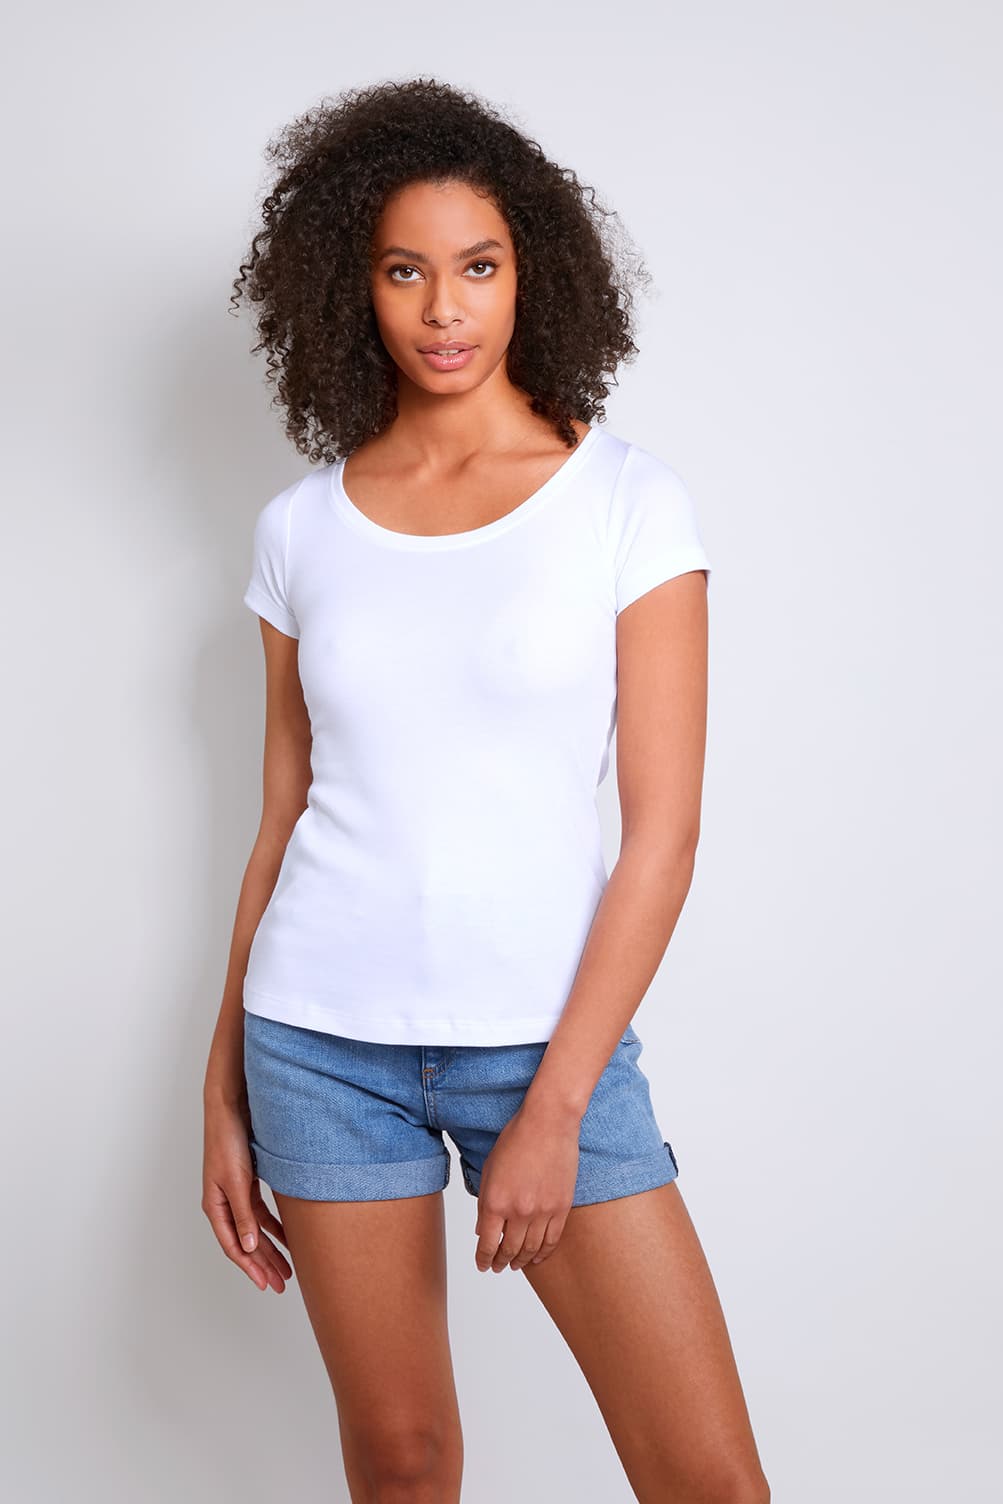 Lady Modal Padded Built in Bra T-Shirts Short Sleeve Scoop Neck